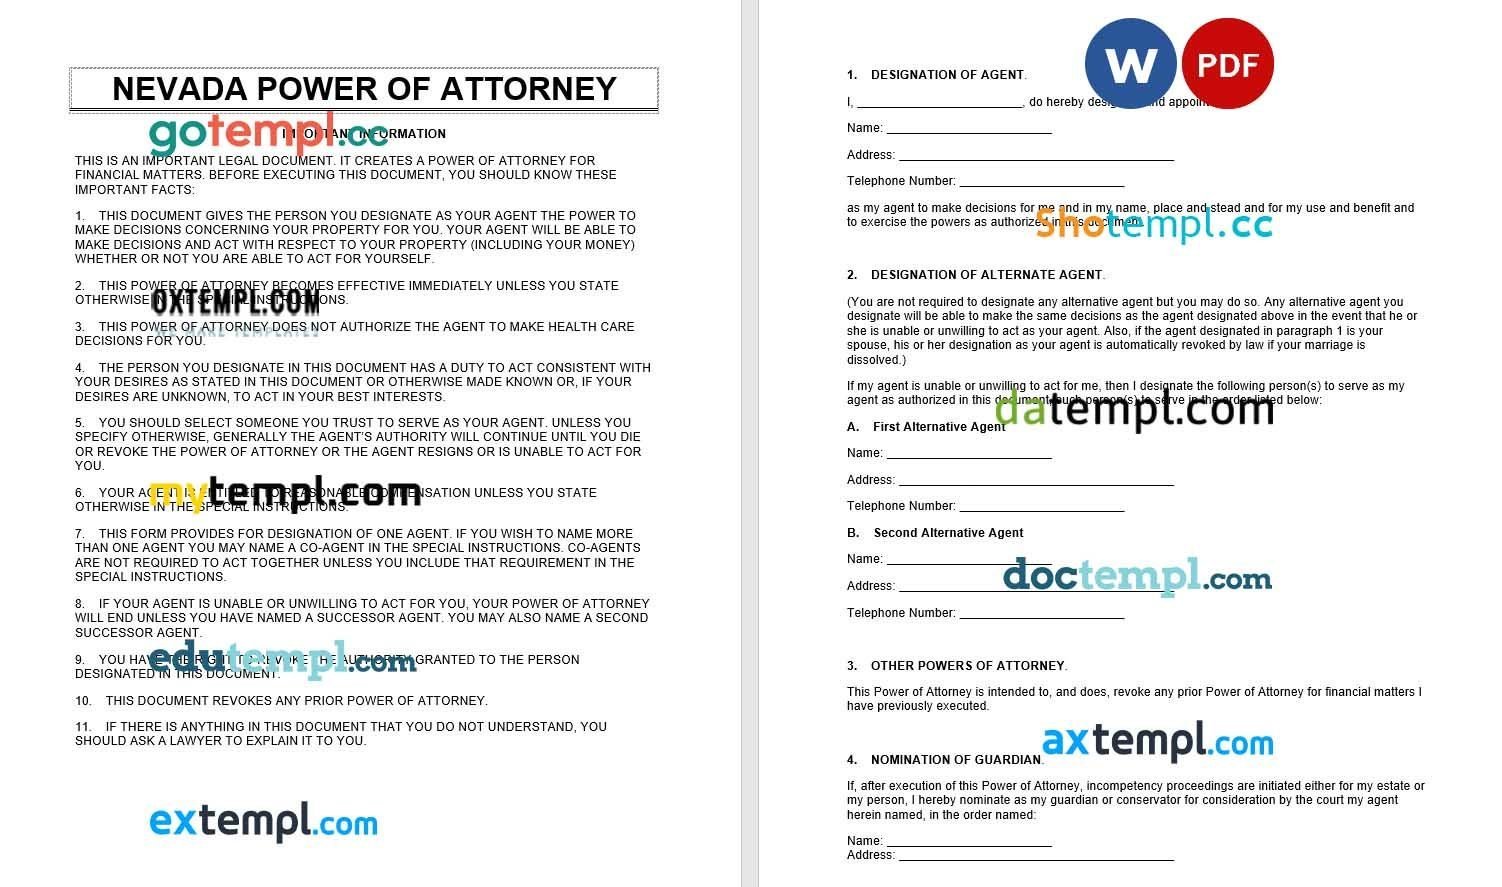 Nevada Power of Attorney example, fully editable